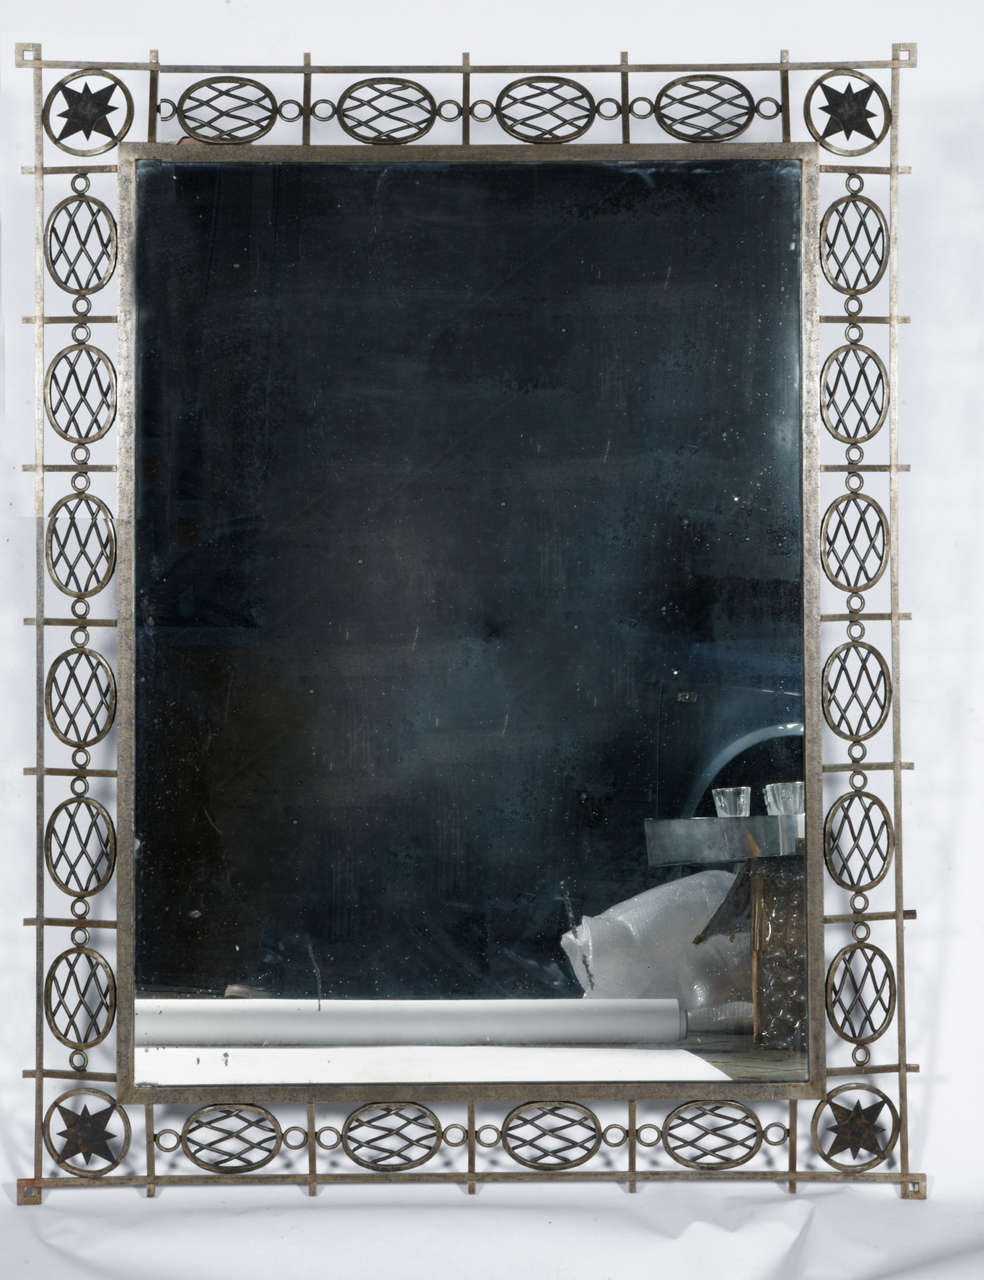 One of a kind neoclassical 1940s wrought iron mirror.
Original mirror possibility to changed it for a new one.